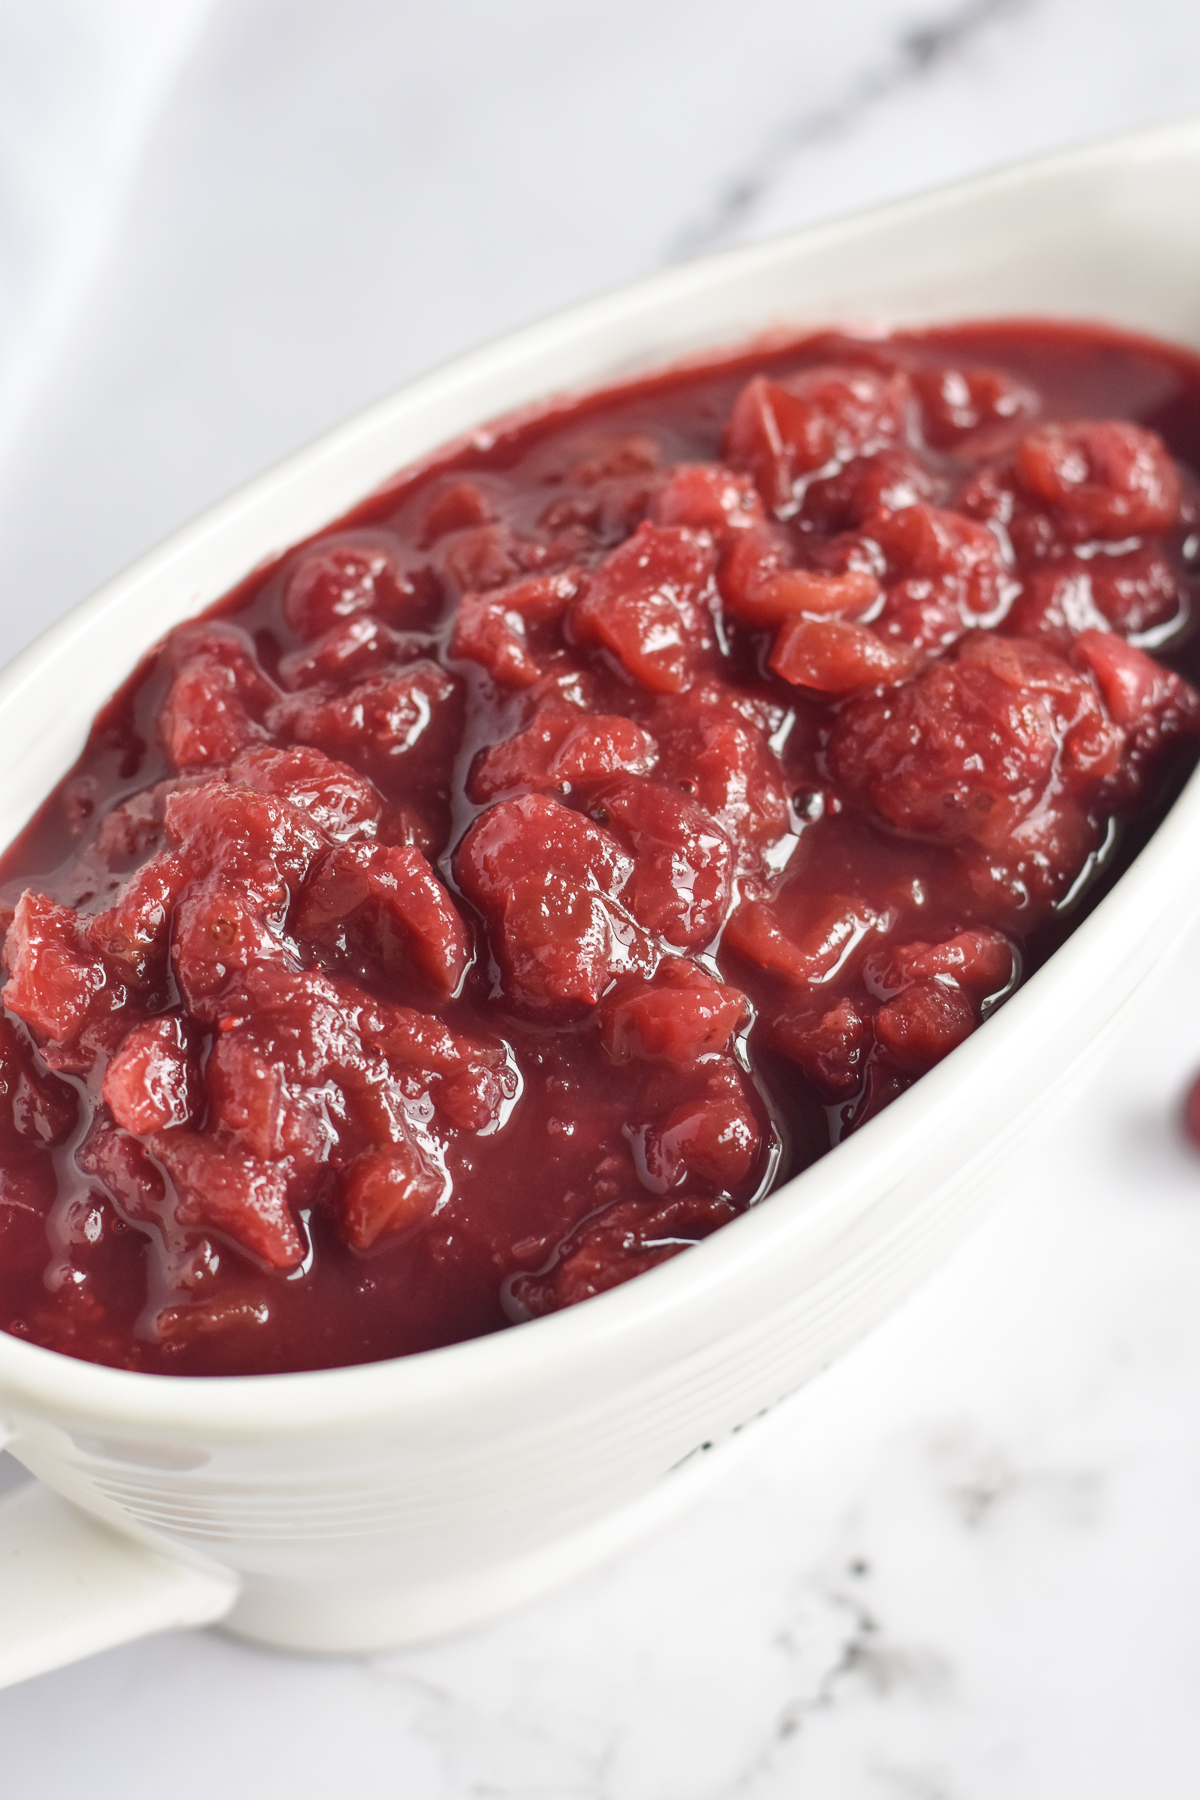 This Slow Cooker Cranberry Sauce is a great make-ahead side dish for your Thanksgiving day meal.